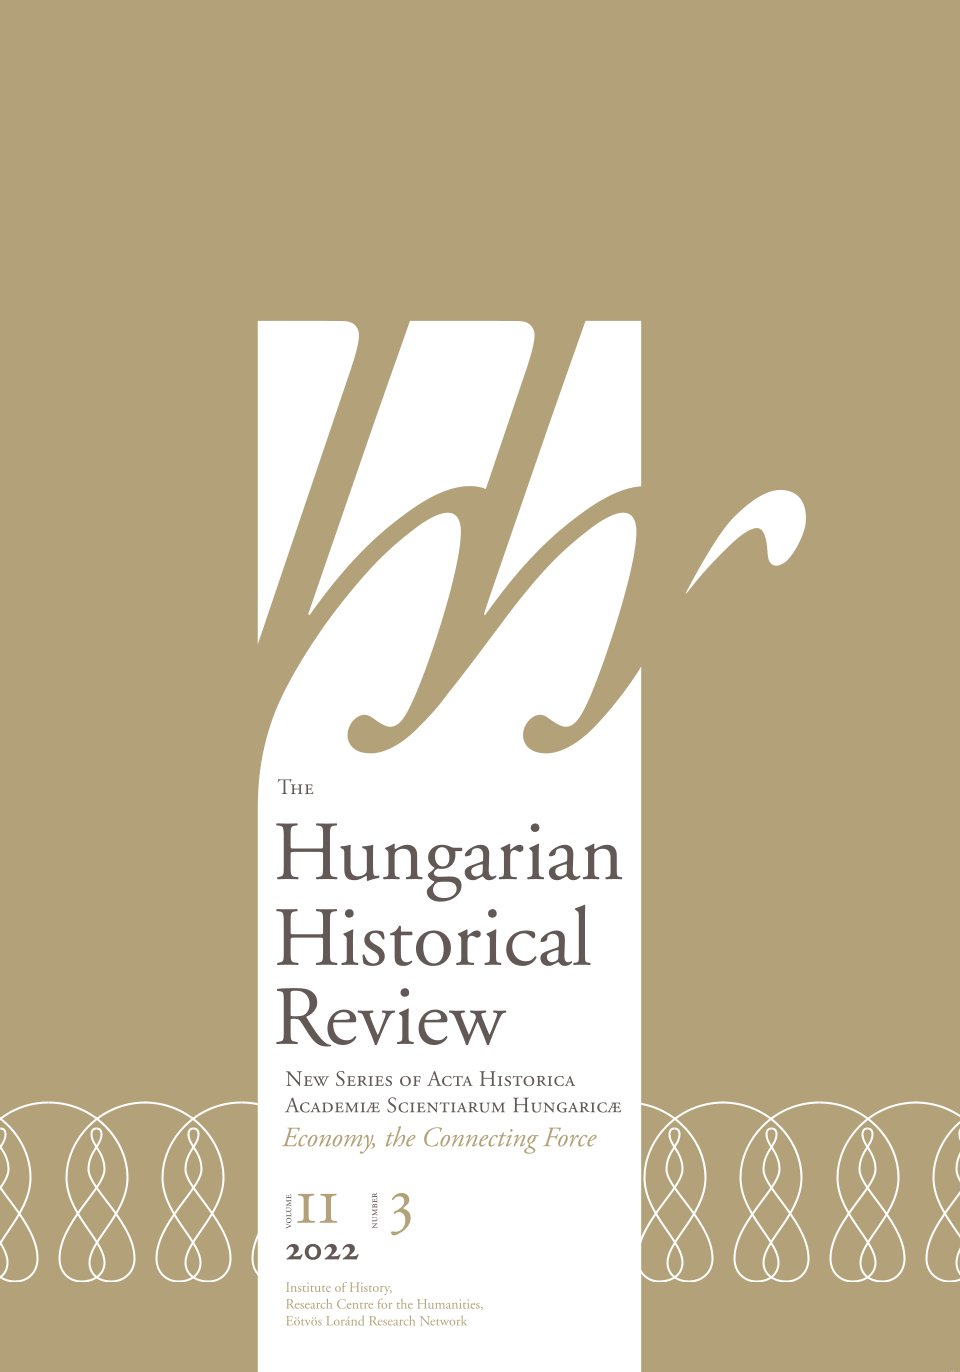 Tender Contracts, Speculation, and Monopoly: Venice and Hungarian Cattle Supply between the Fifteenth and Sixteenth Centuries